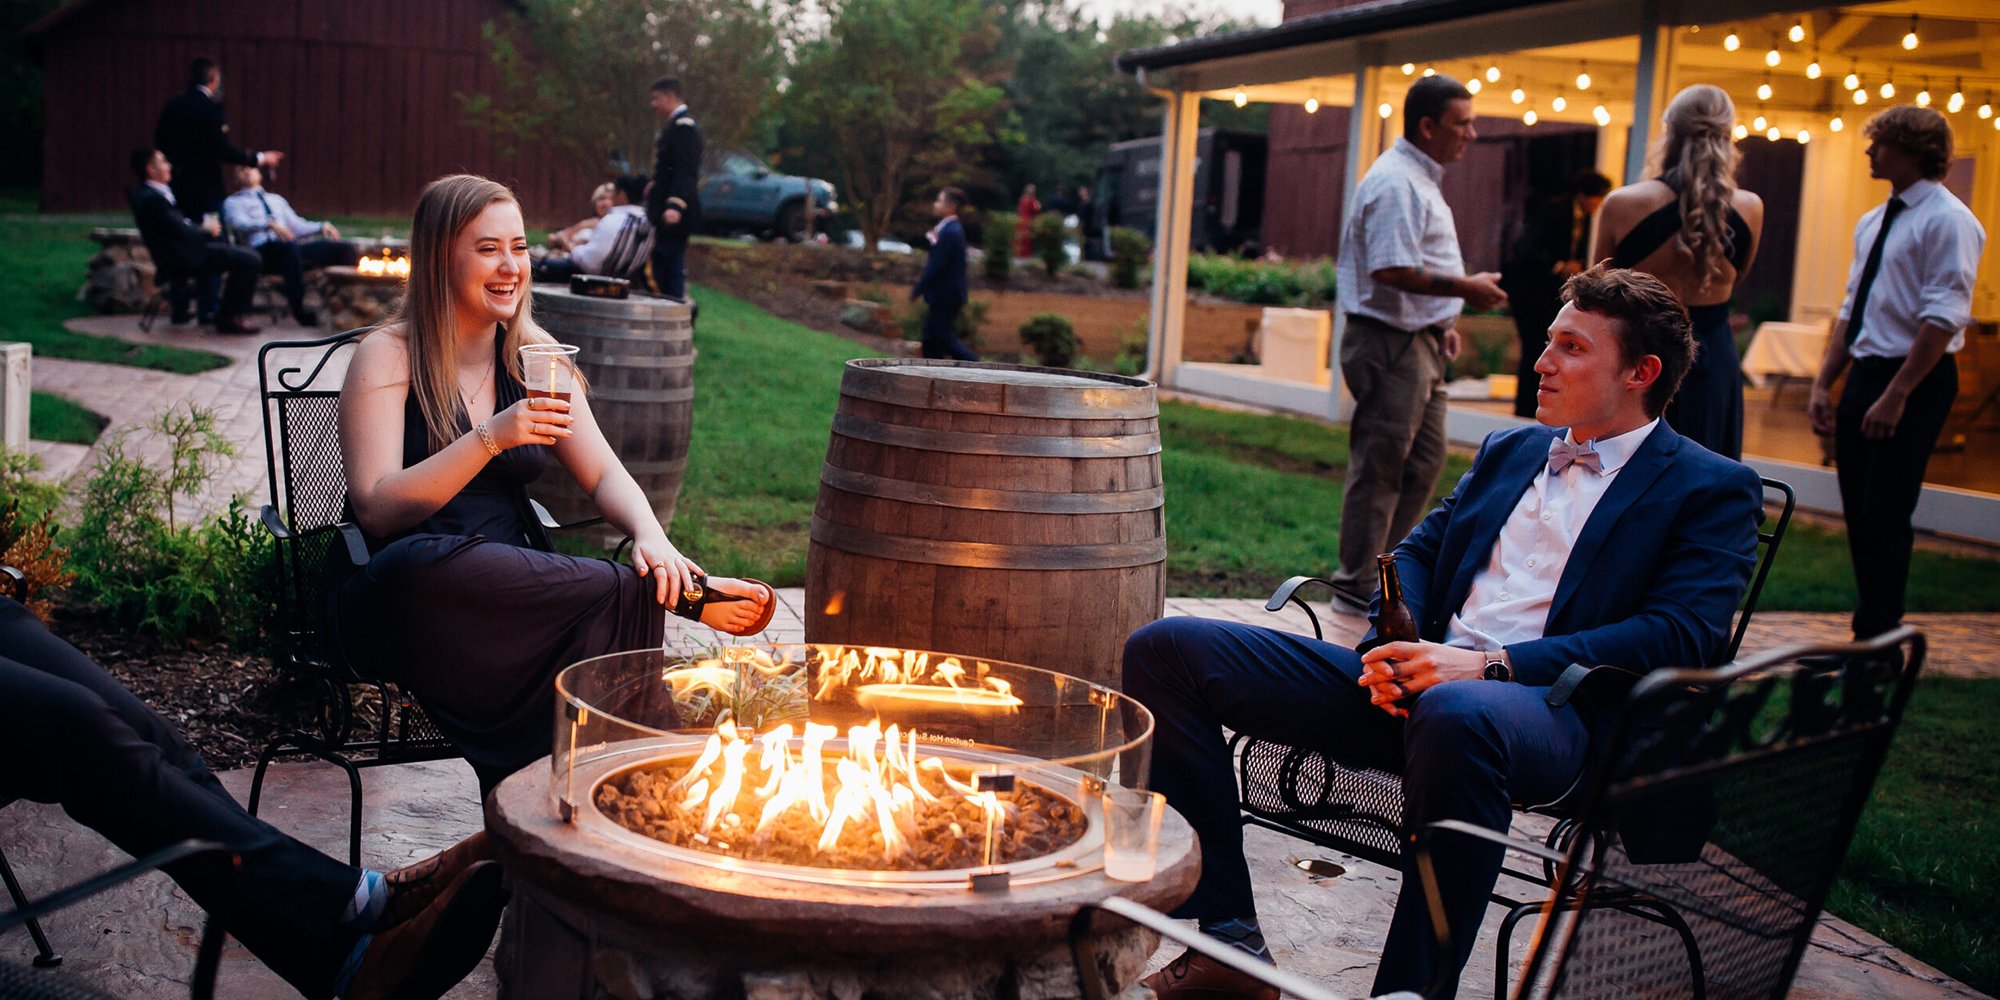 People gather for drinks and starlight at the Bel Air outdoor fire pits. 